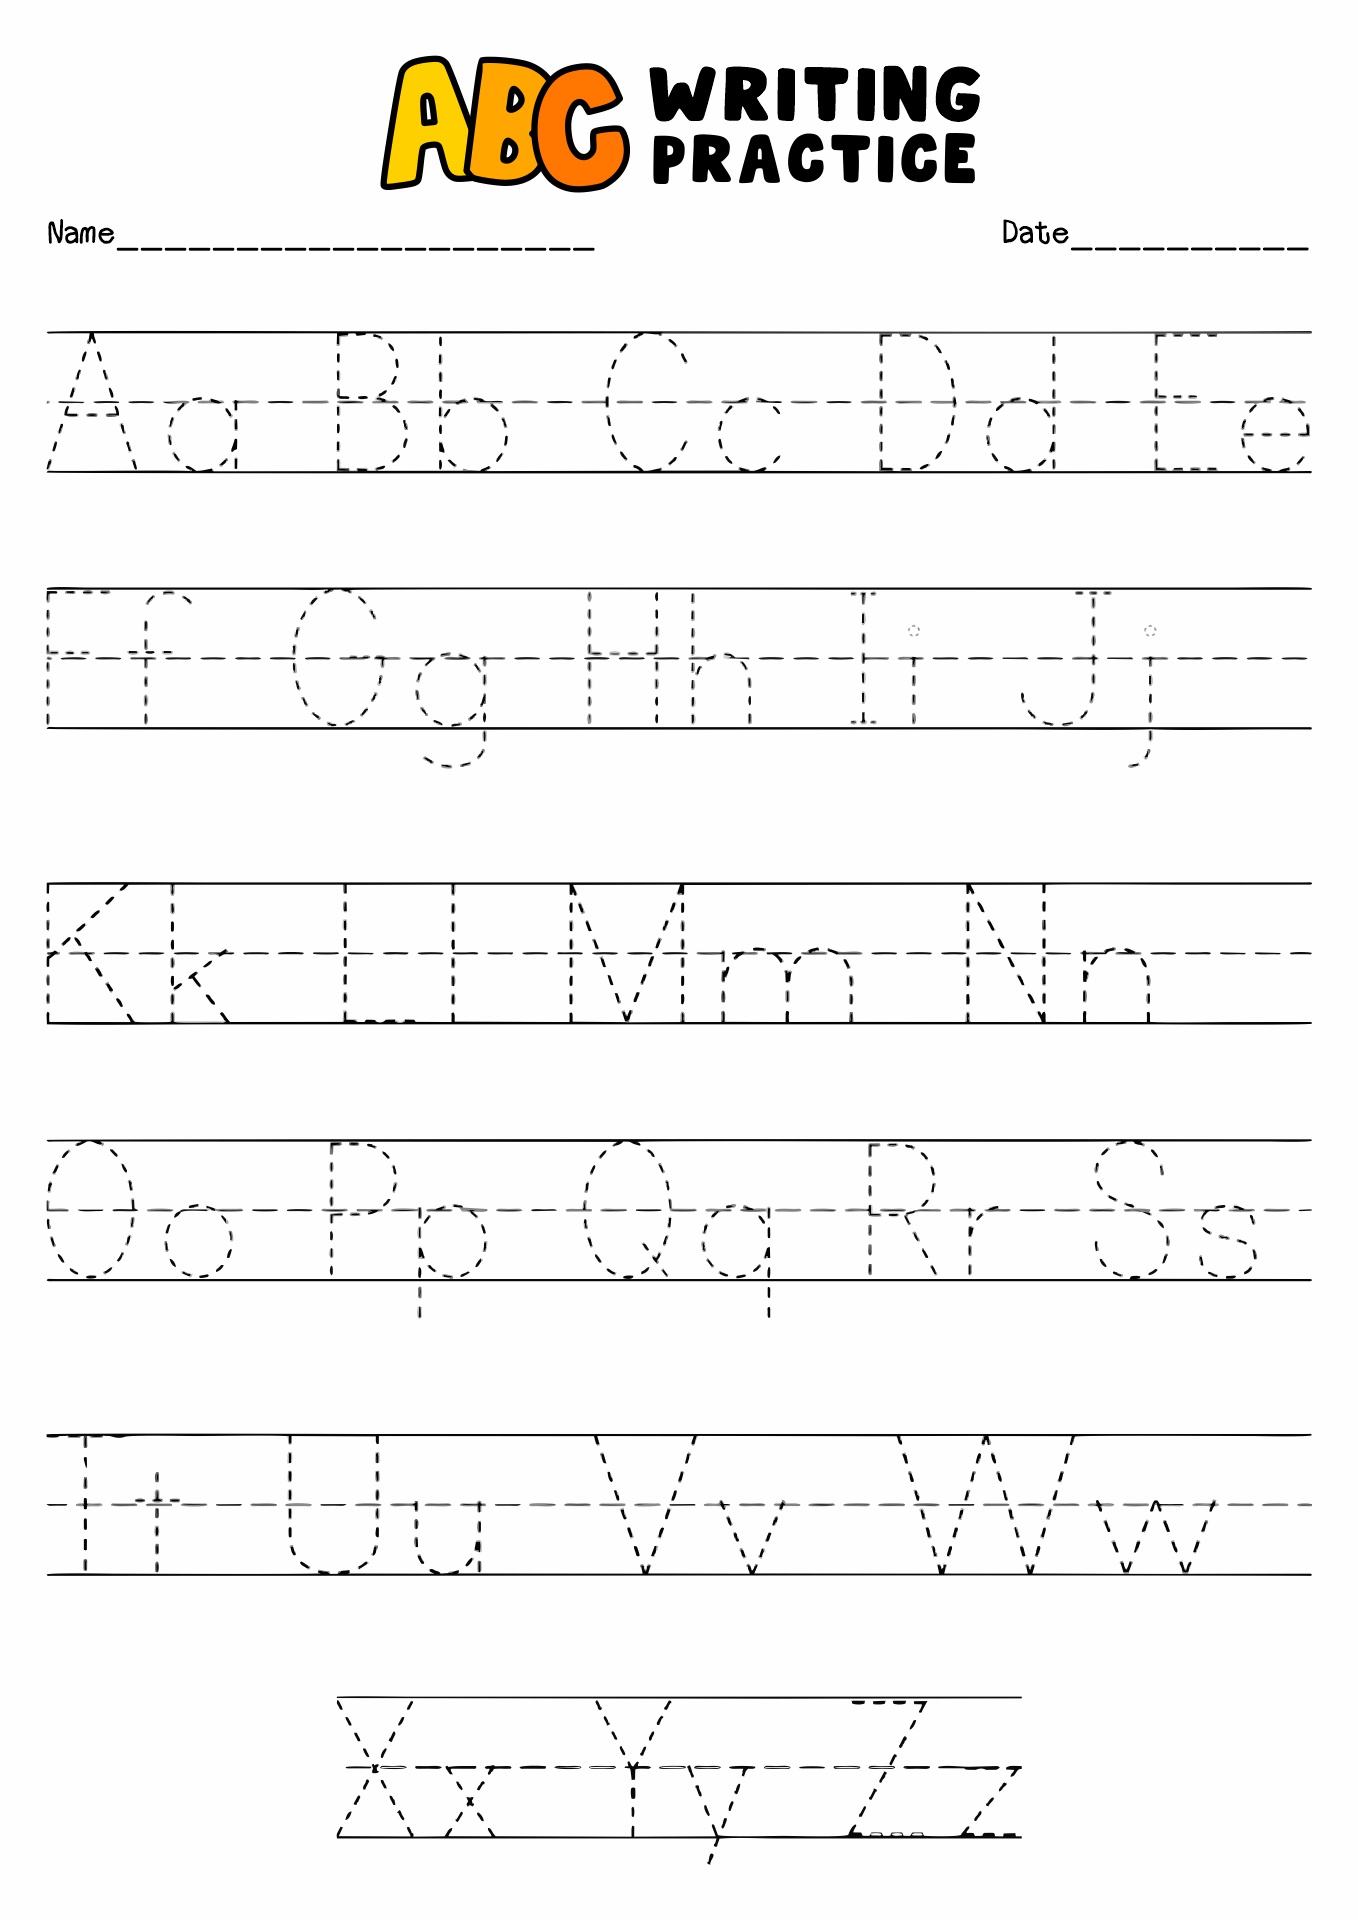 Alphabets Writing Practice Worksheets Printable Image